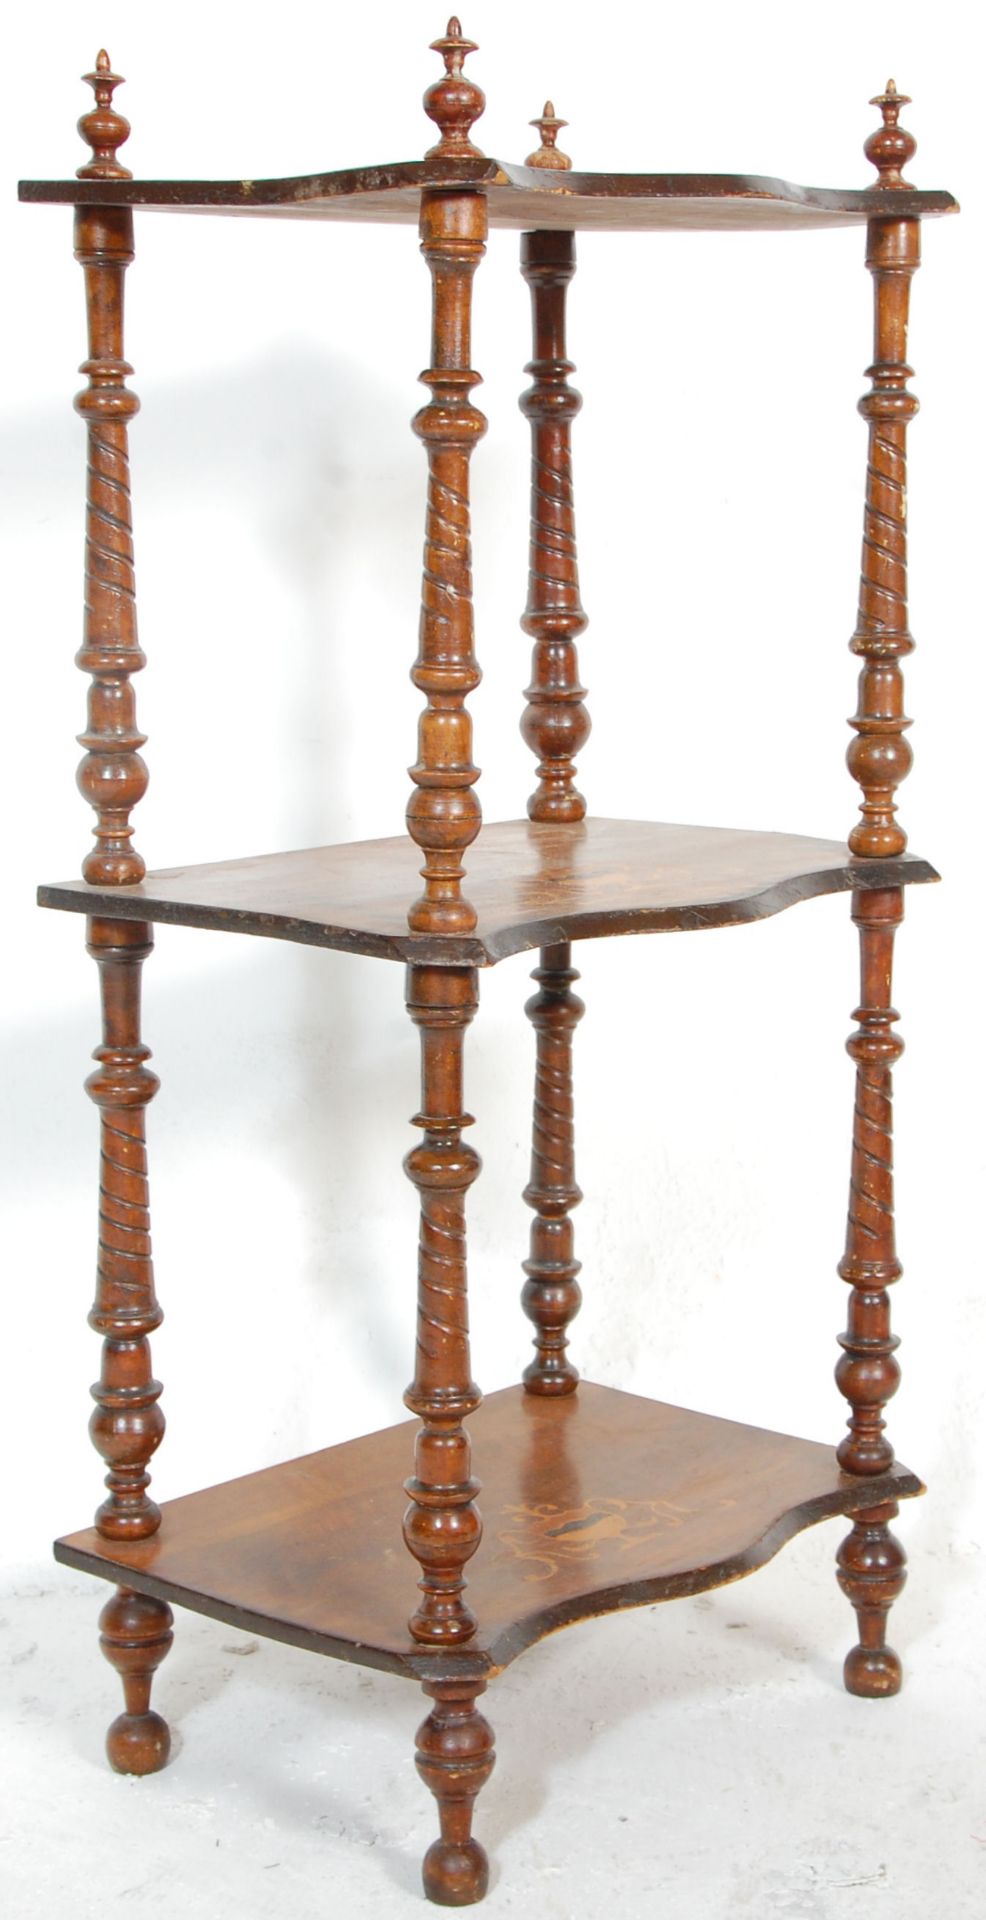 A 19th Century Victorian mahogany whatnot étagère shelving unit having three tiers of serpentine